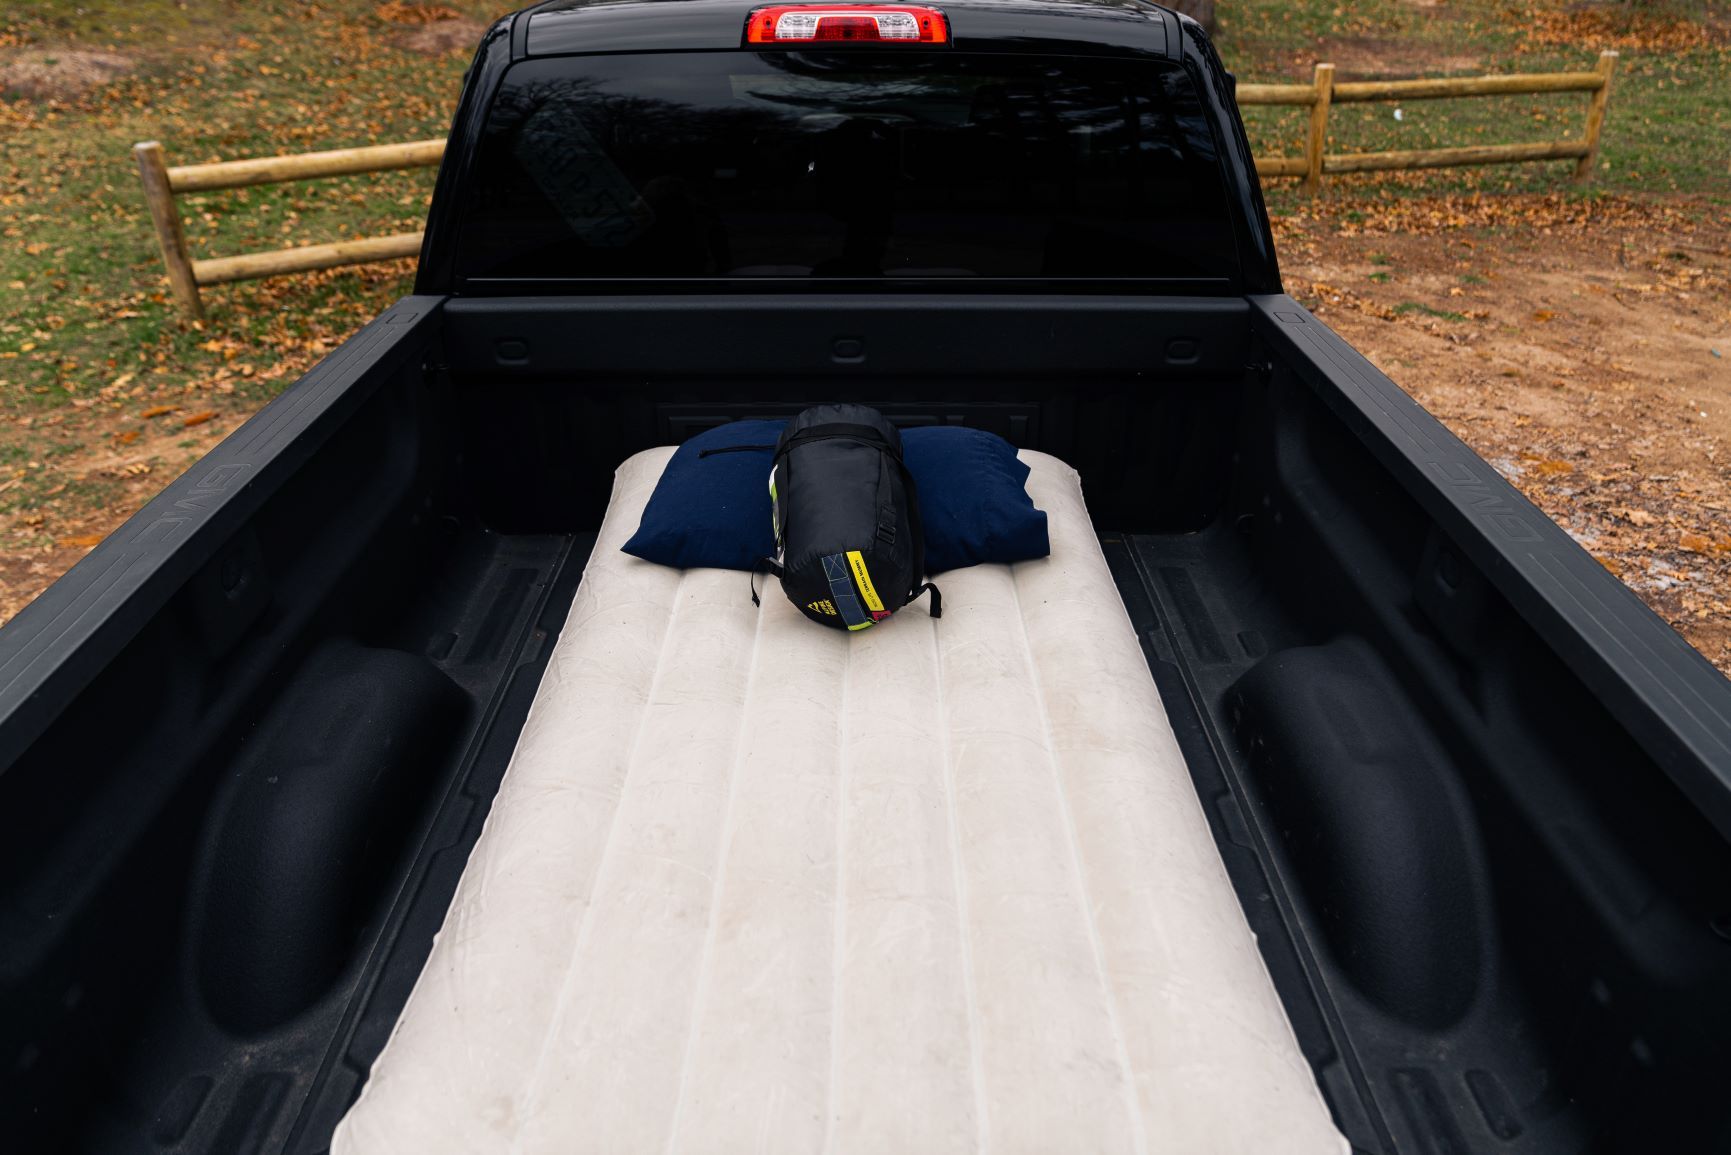 What Size Air Mattress Fits in a Truck Bed?